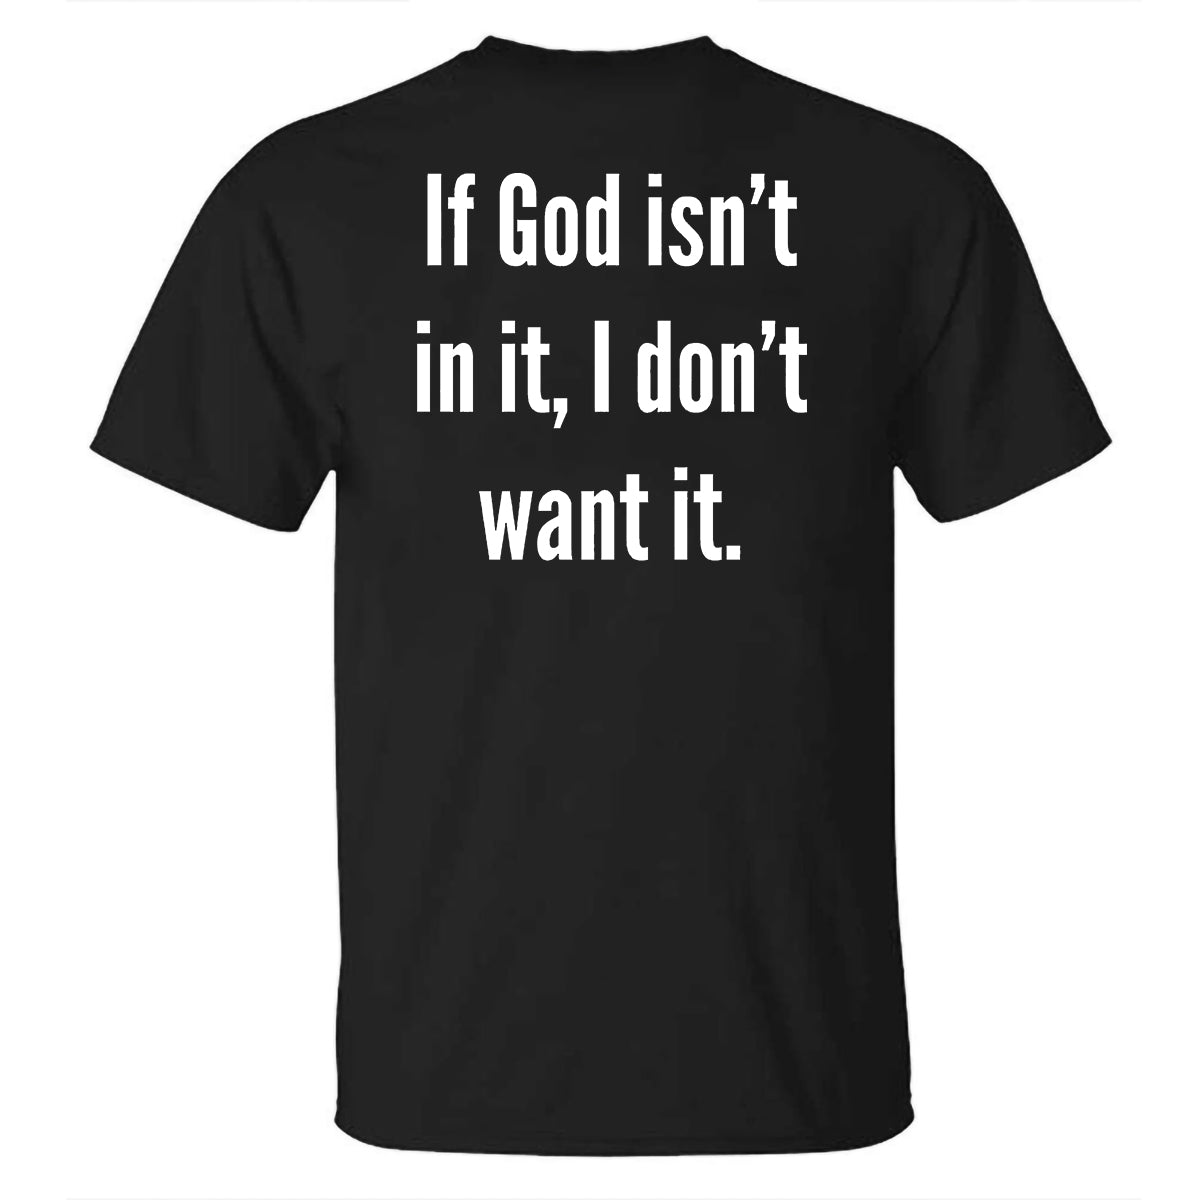 If God isn't in it, I don't want it Printed Casual T-shirt